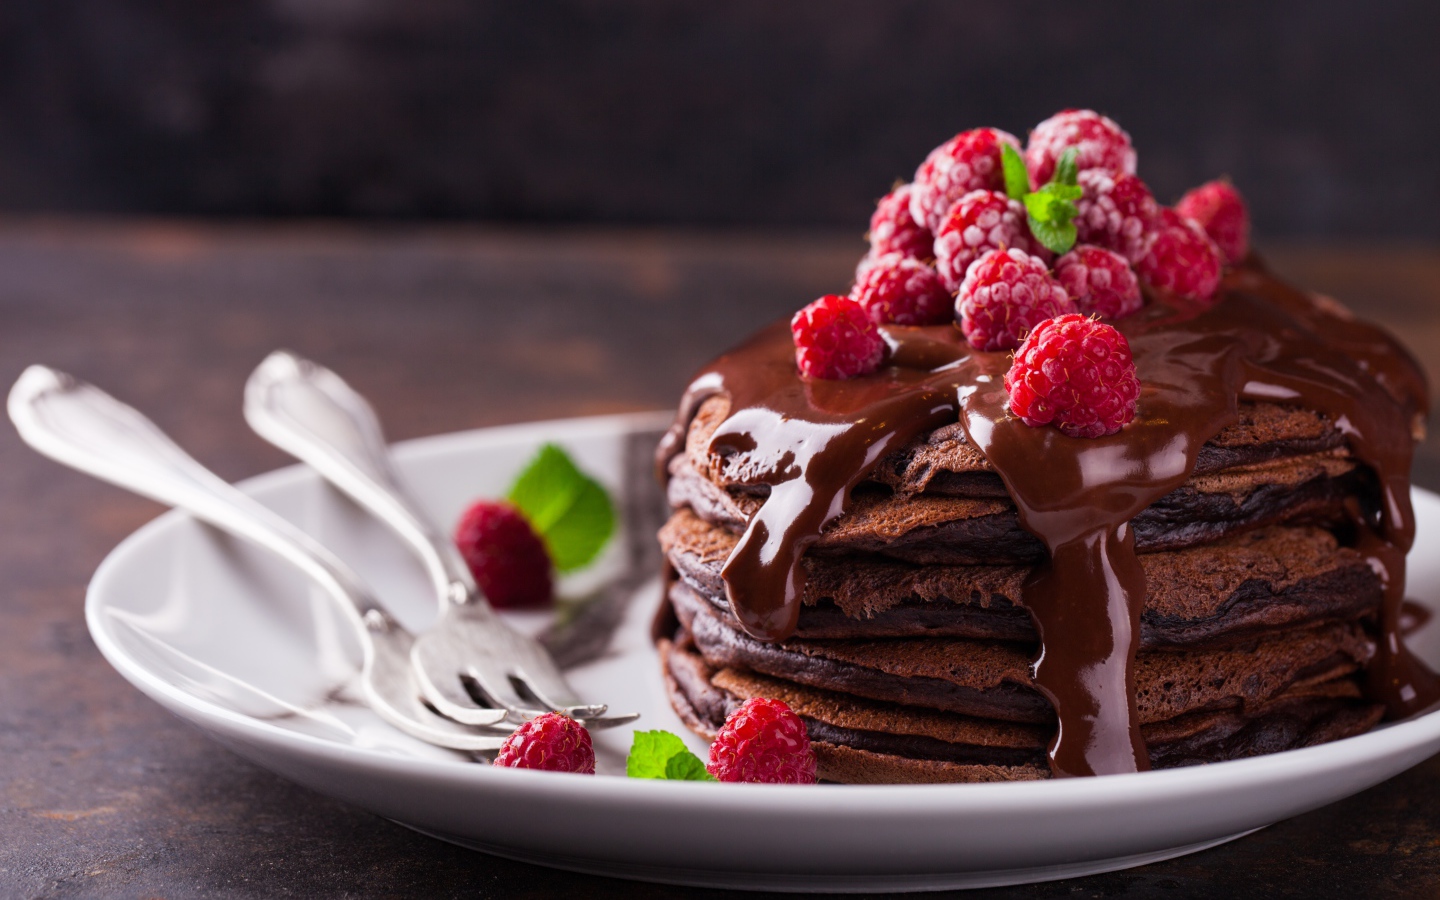 Chocolate Pancakes on a Plate with Chocolate and Raspberry Berries